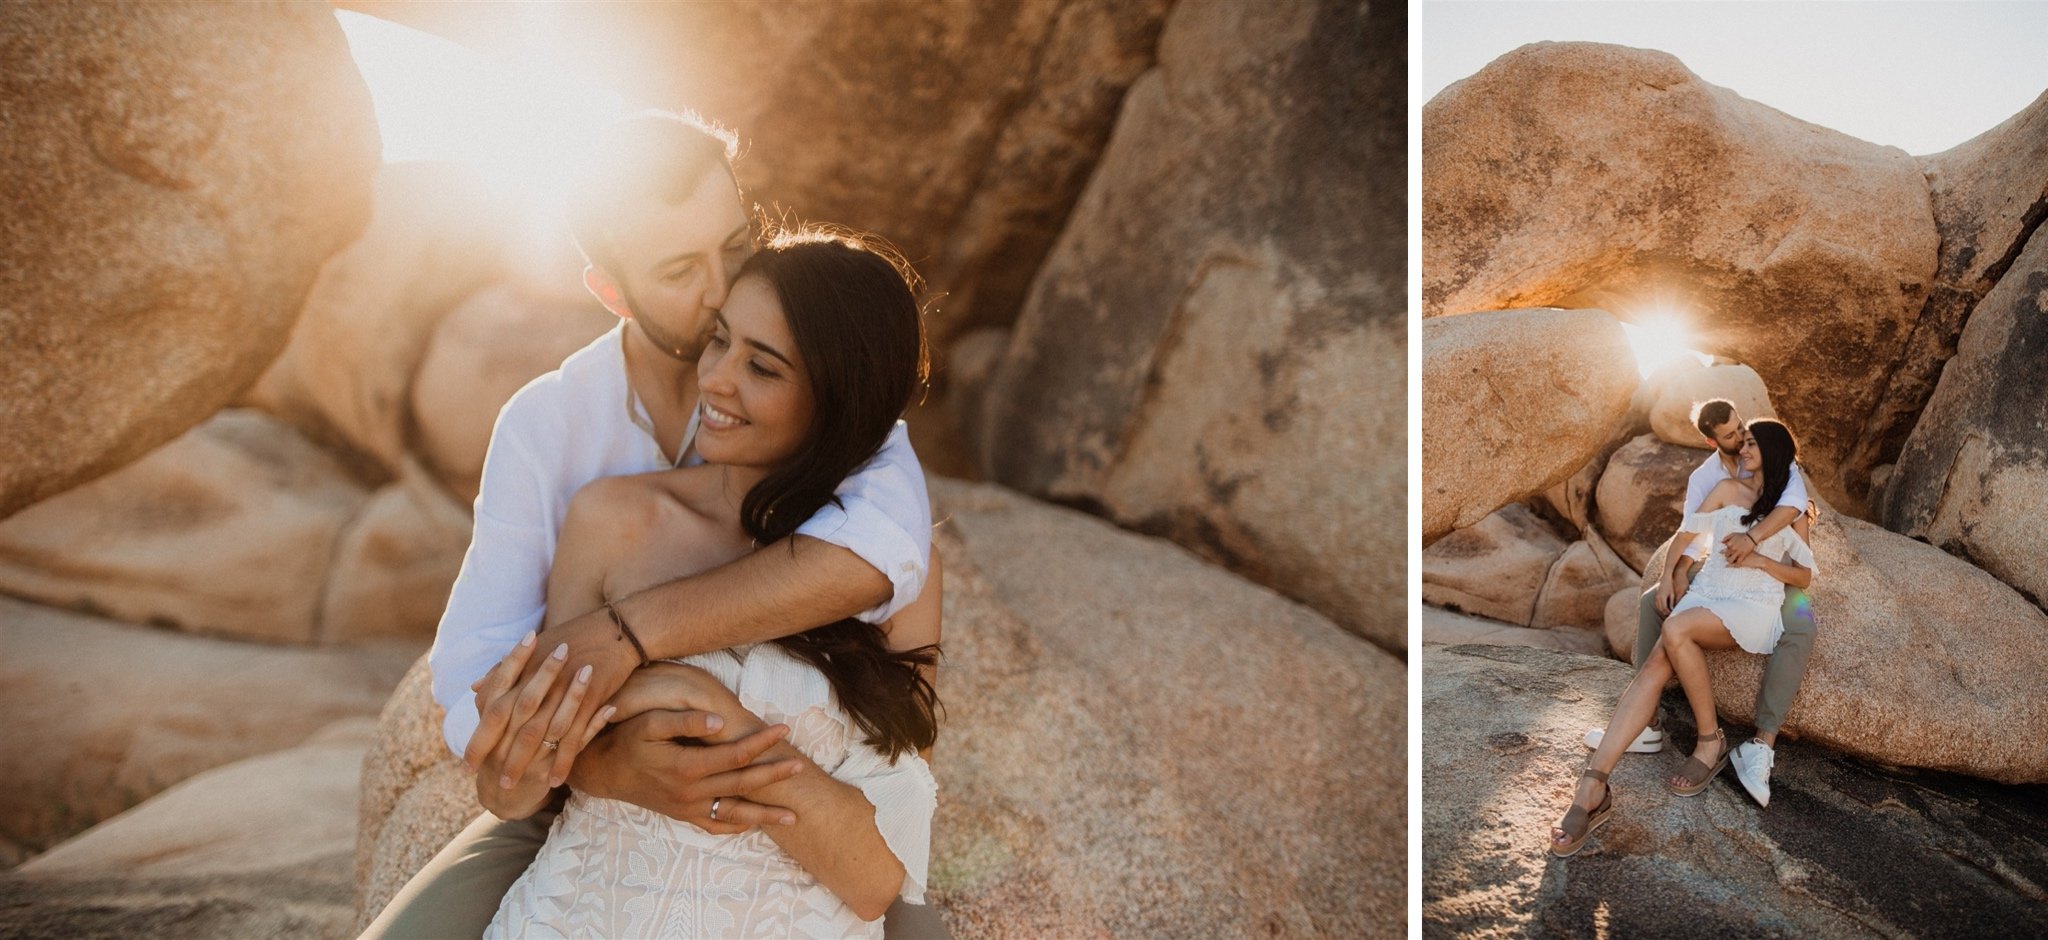 Joshua Tree Couples Session Surprise Proposal - Will Khoury Photography_34.jpg